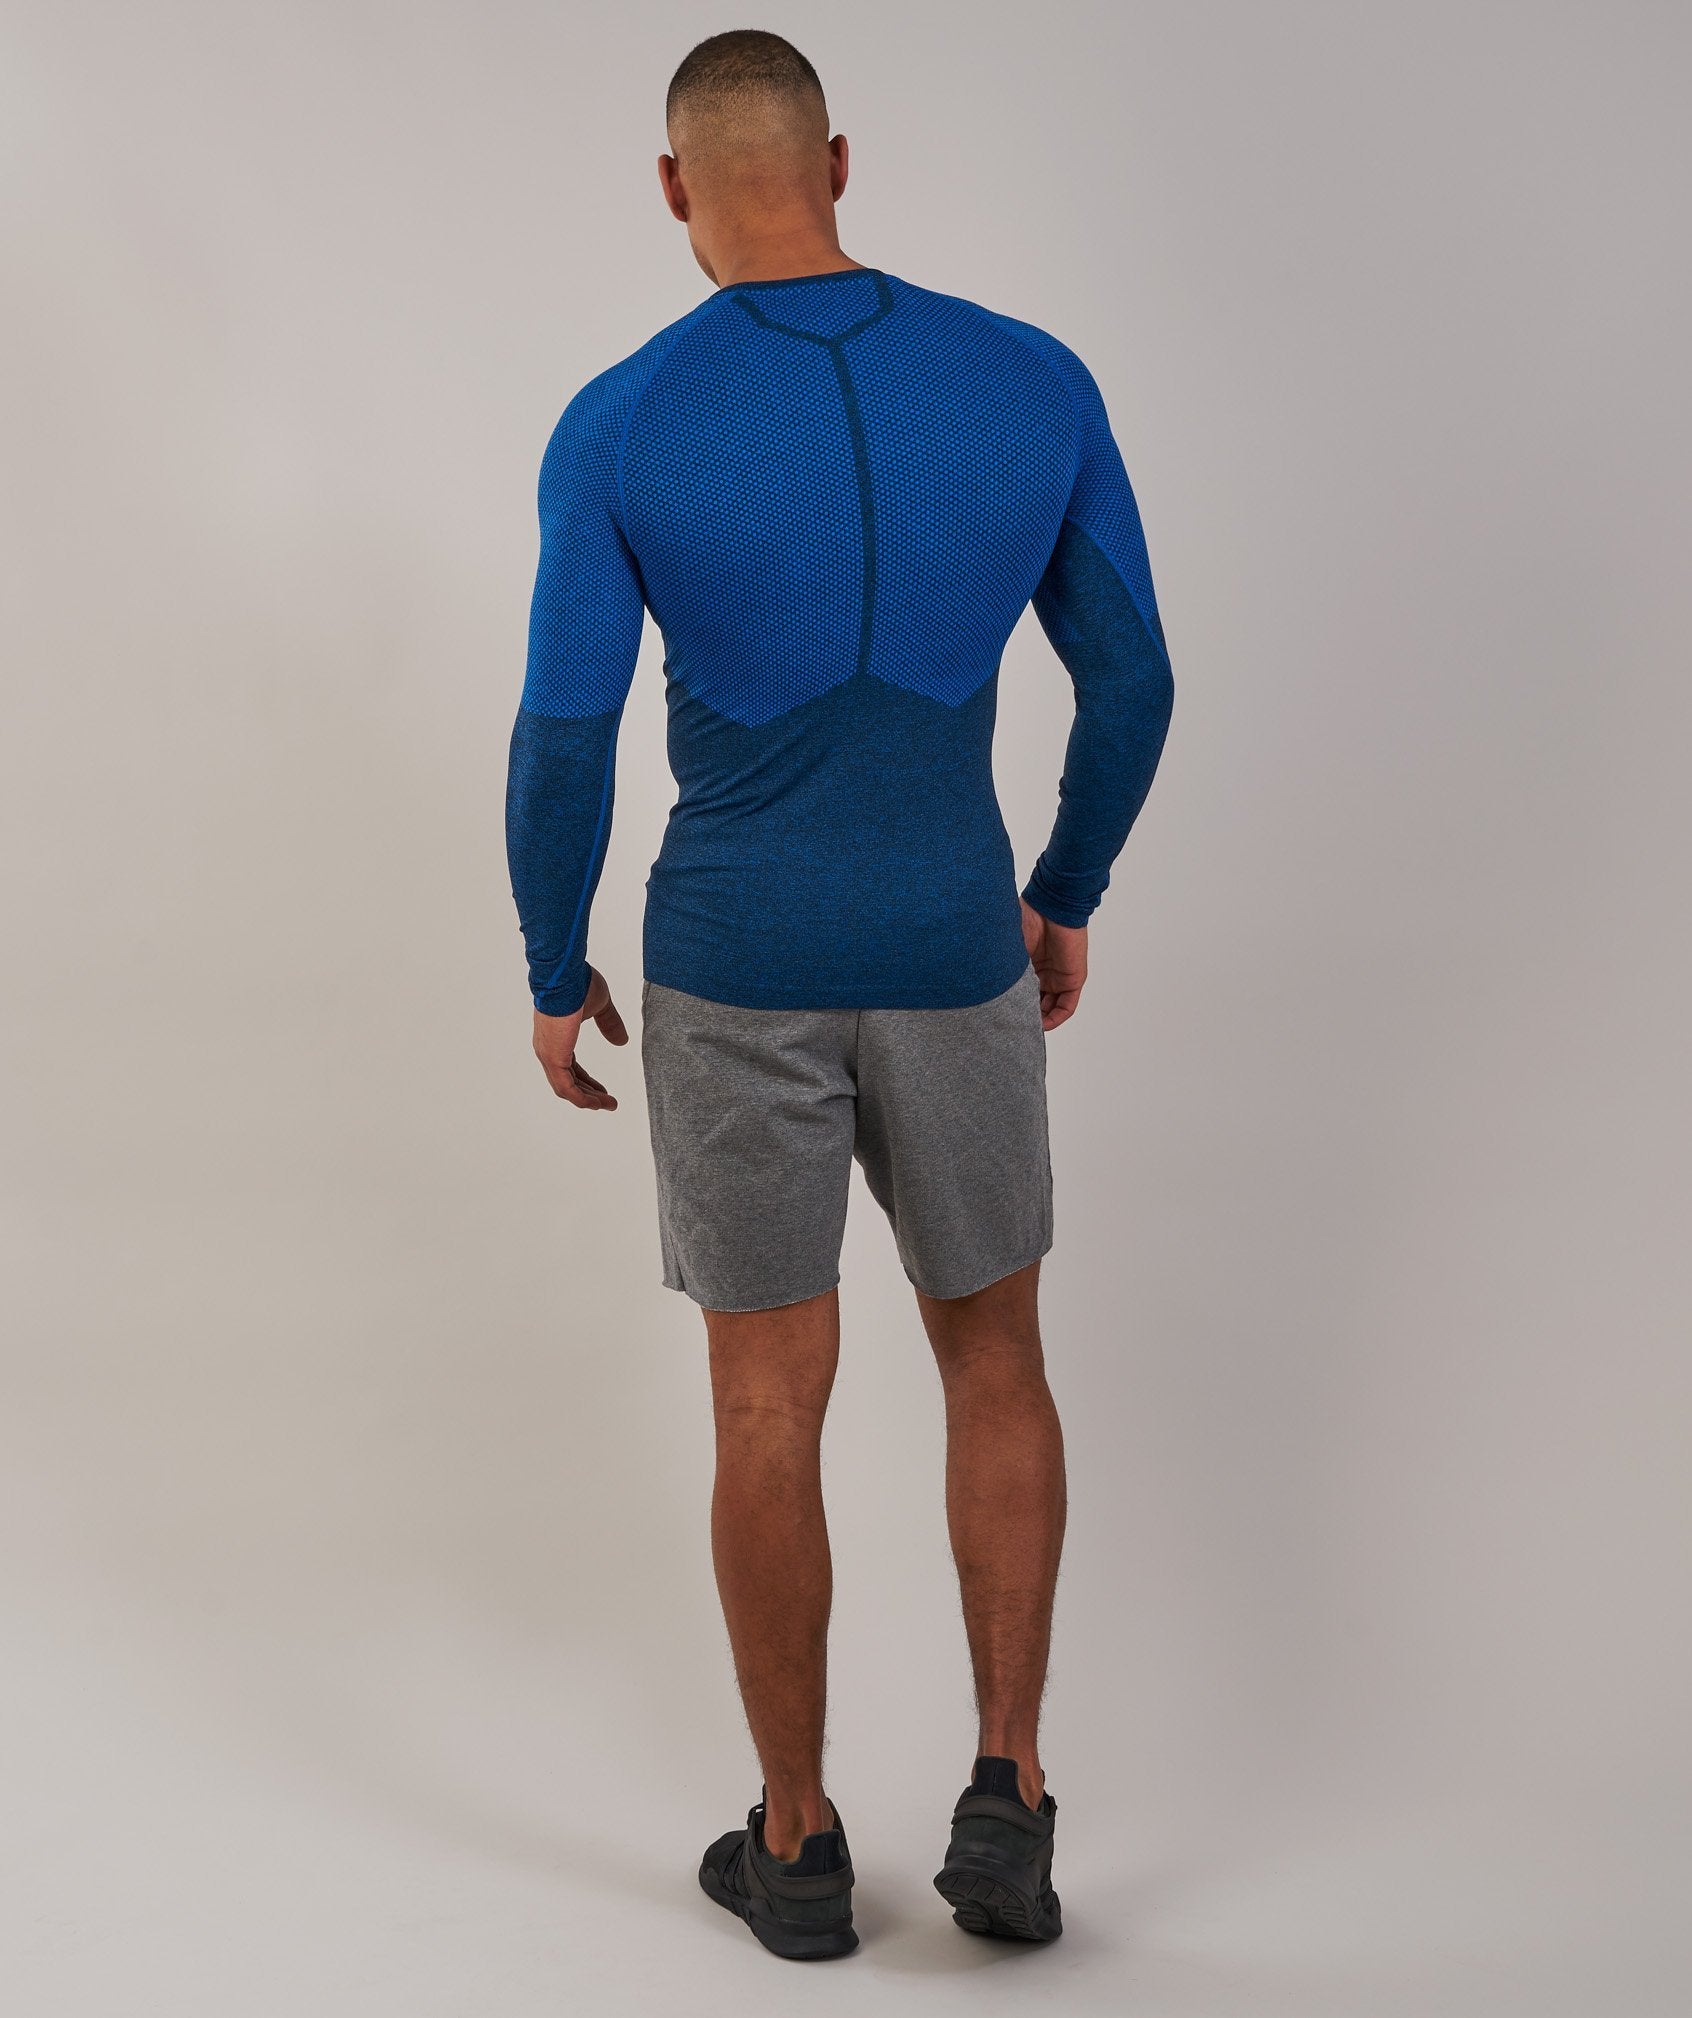 Performance Seamless Long Sleeve T-Shirt in Dive Blue Marl - view 2